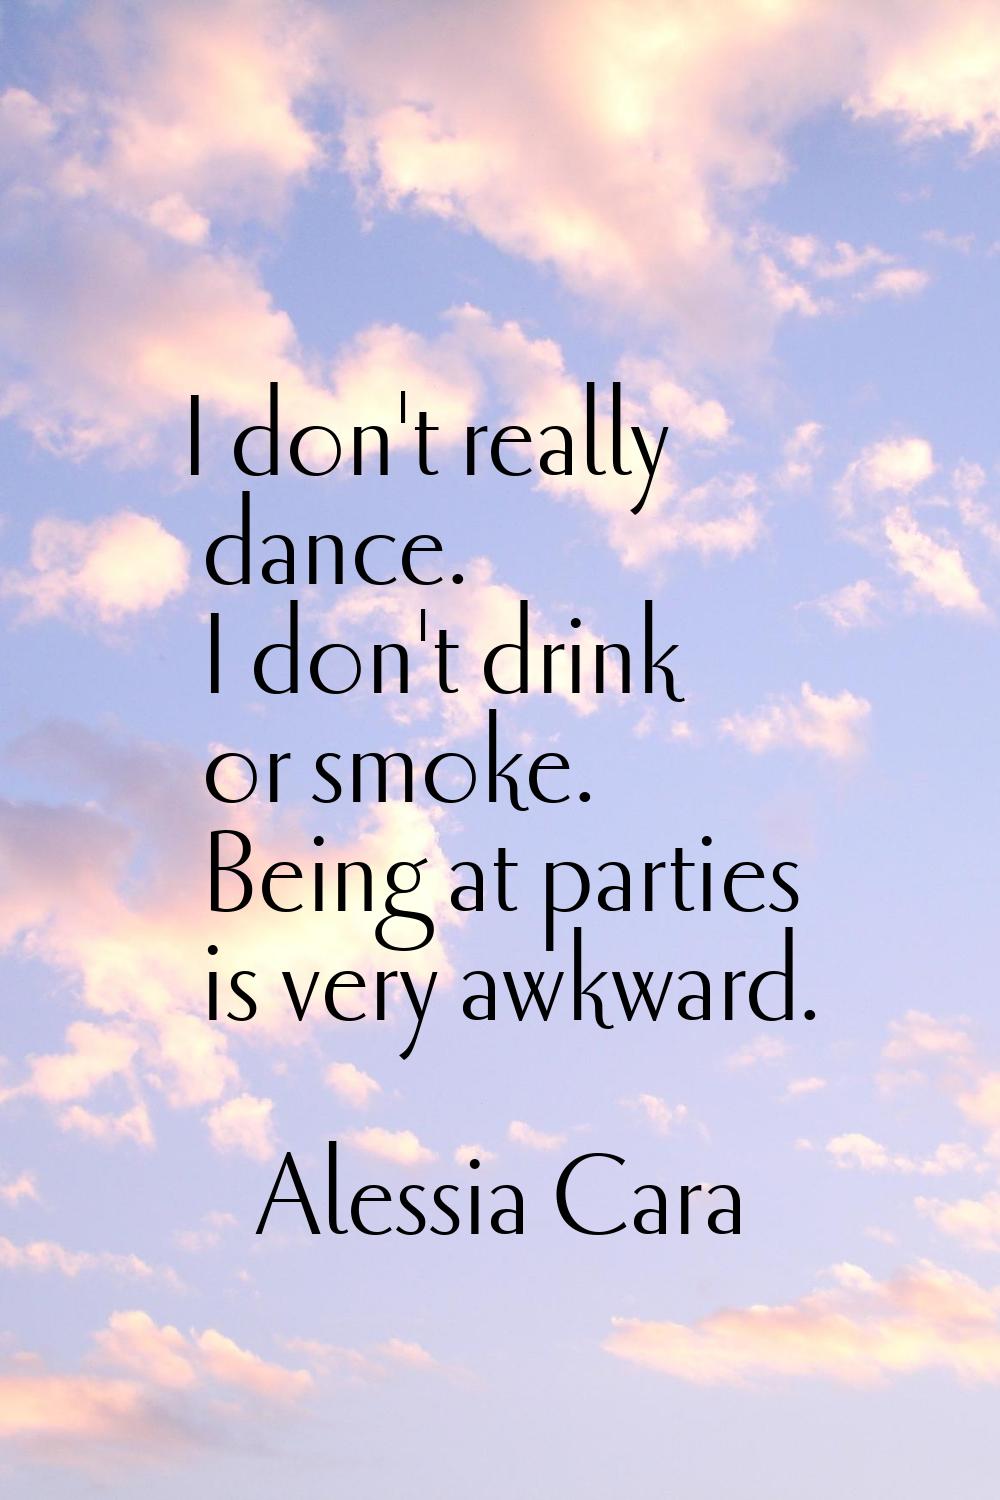 I don't really dance. I don't drink or smoke. Being at parties is very awkward.